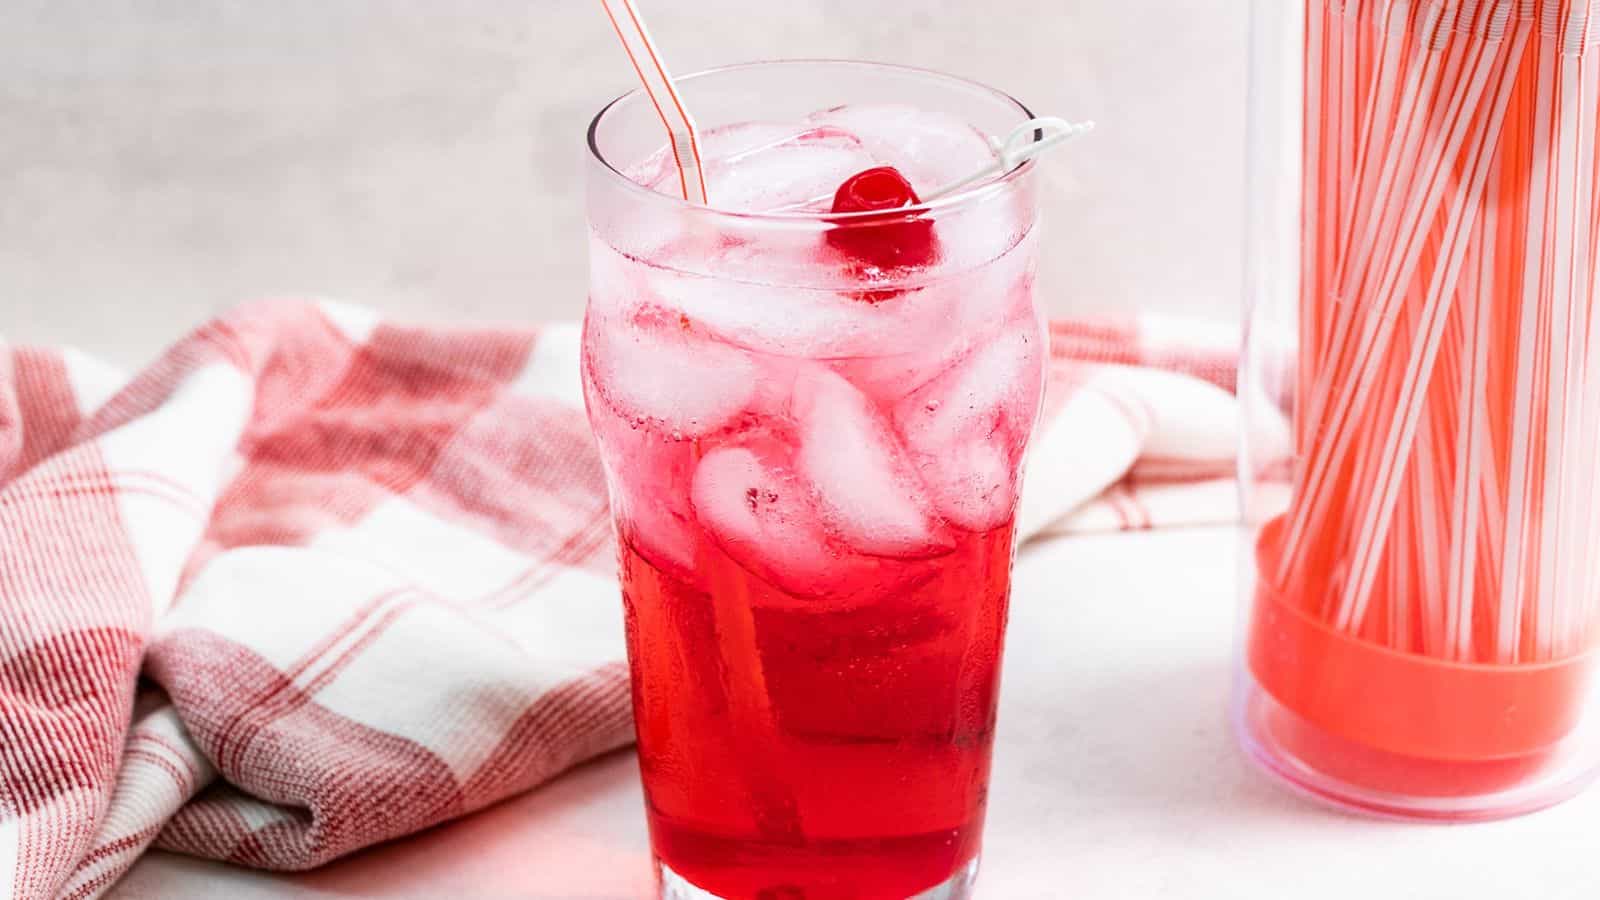 A glass of red soda with ice and a cherry, accompanied by a straw and a red and white napkin, on a light background.